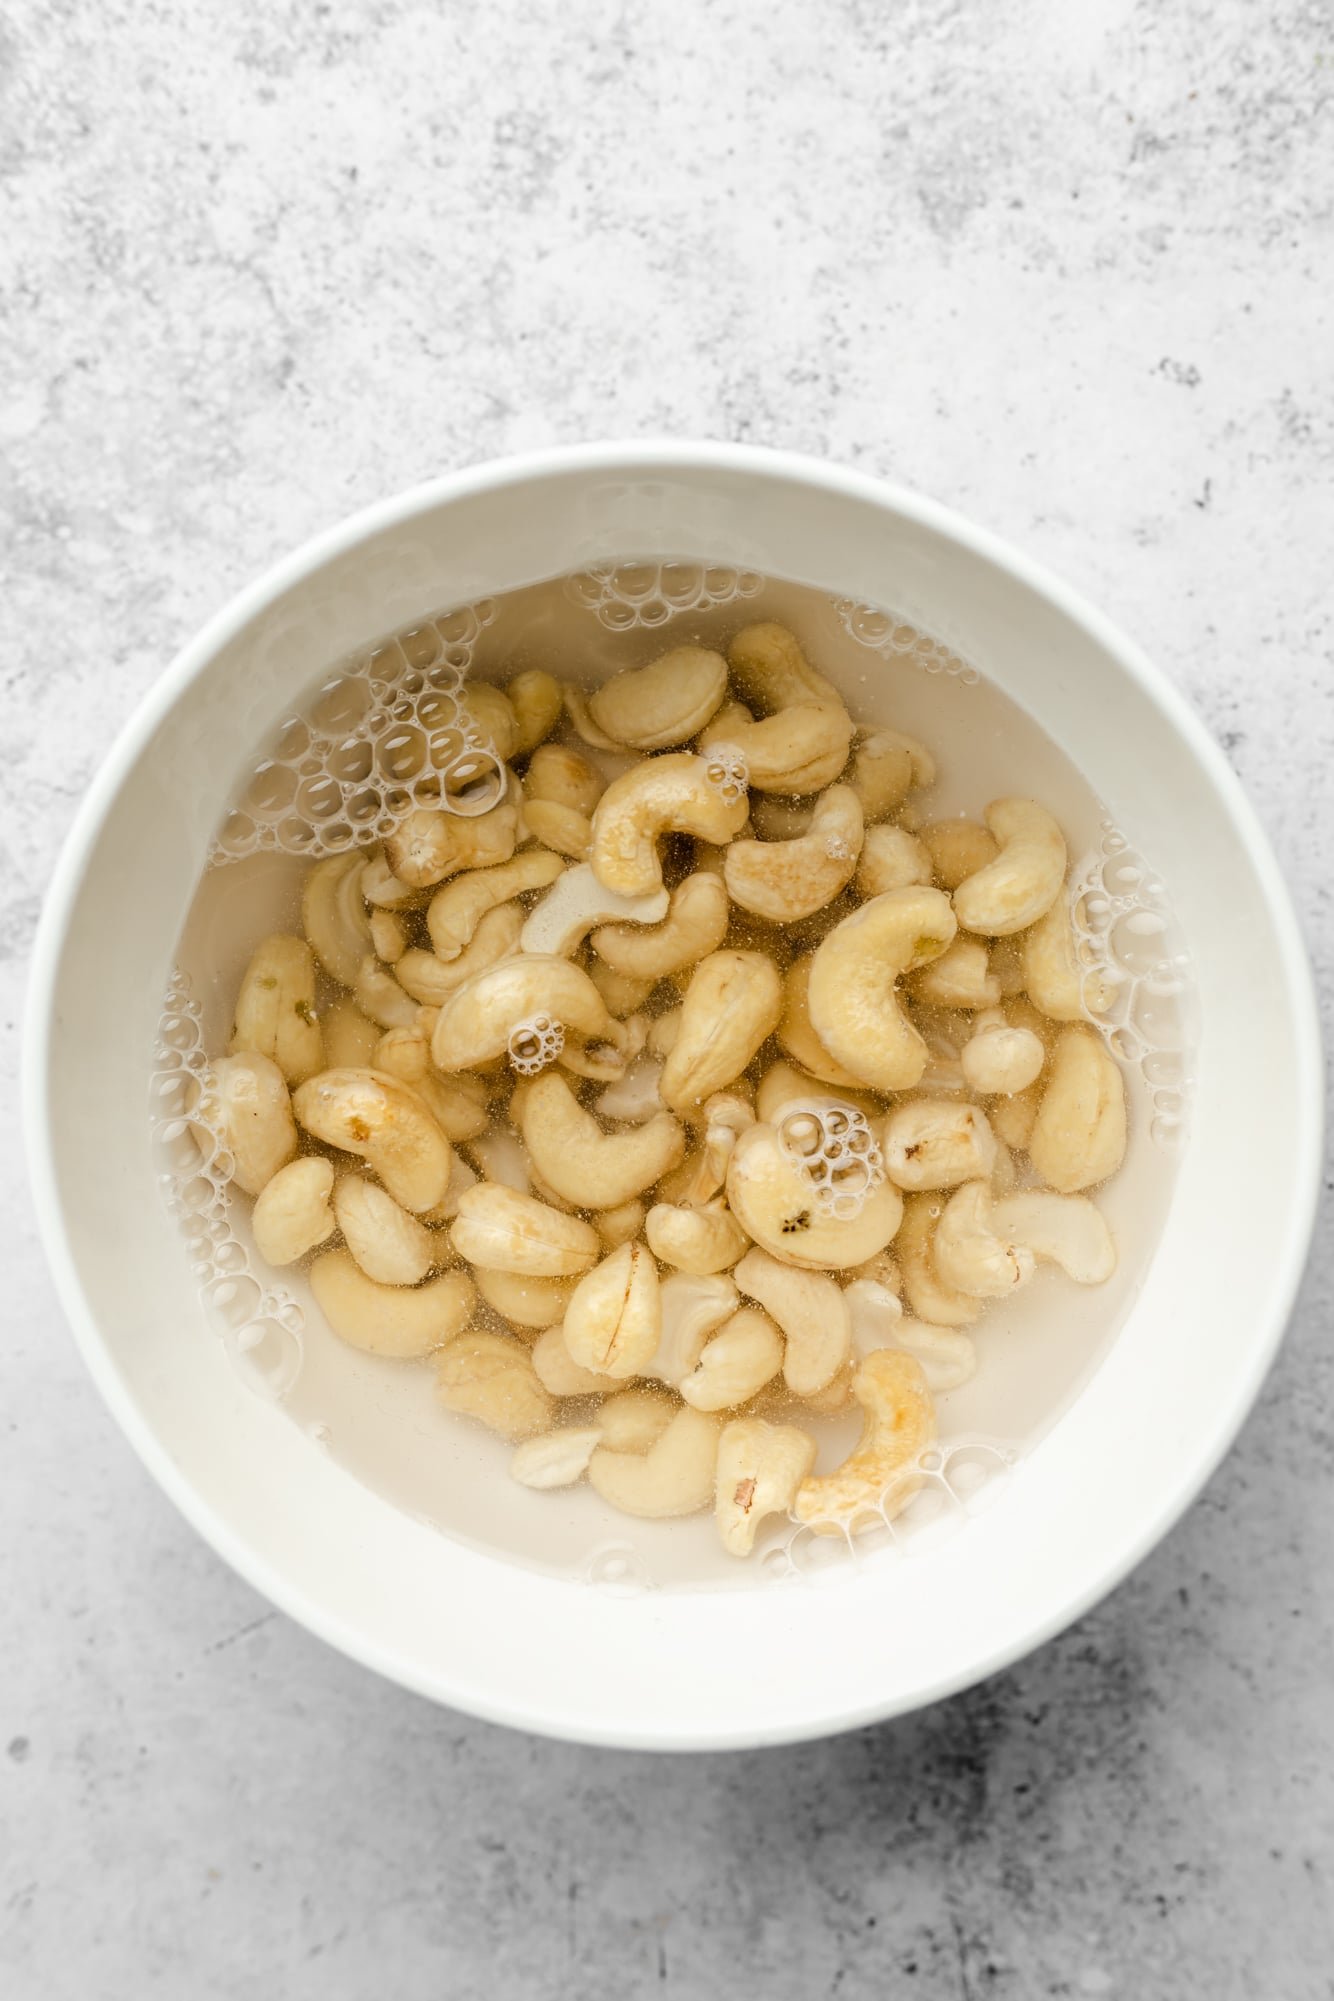 cashews soaking in a bowl of water.